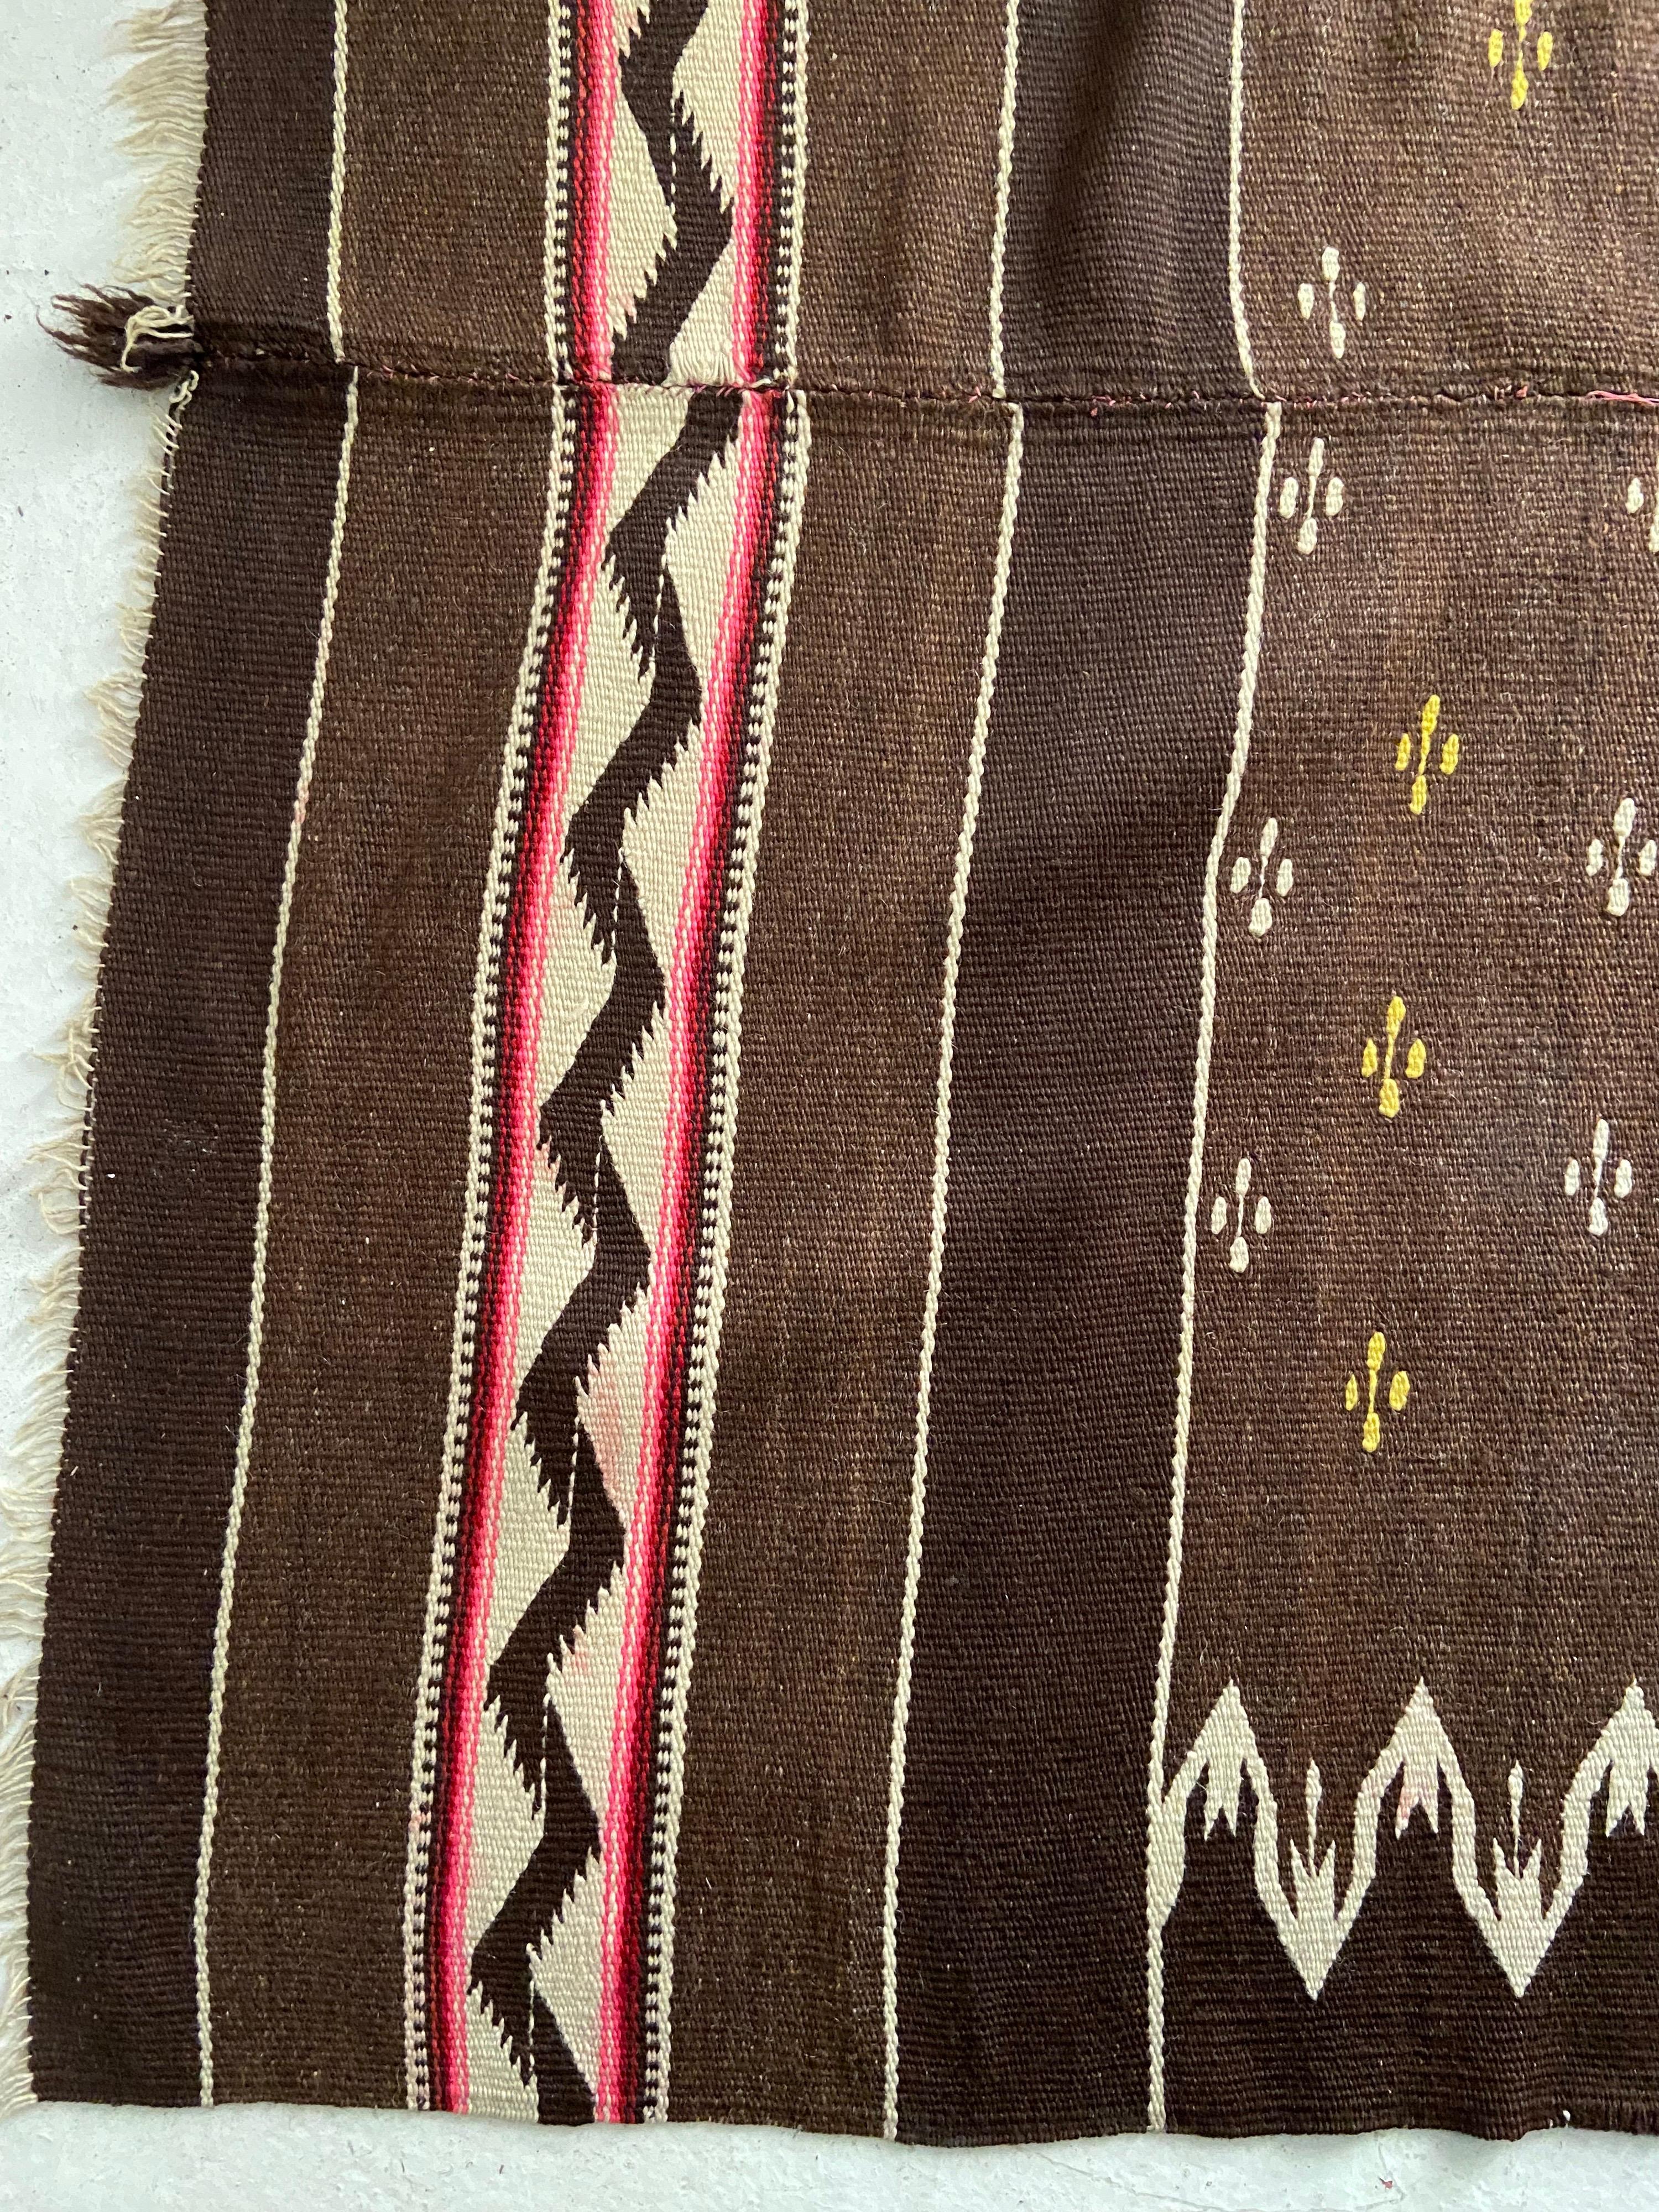 Mid-20th century wool blanket from the Tlacolula area of Oaxaca. Woven on a back-strap loom with 2 sections woven together. Colors remain intact with little to no fading. Center medallion area reminiscent of the serape/saltillo style of design.